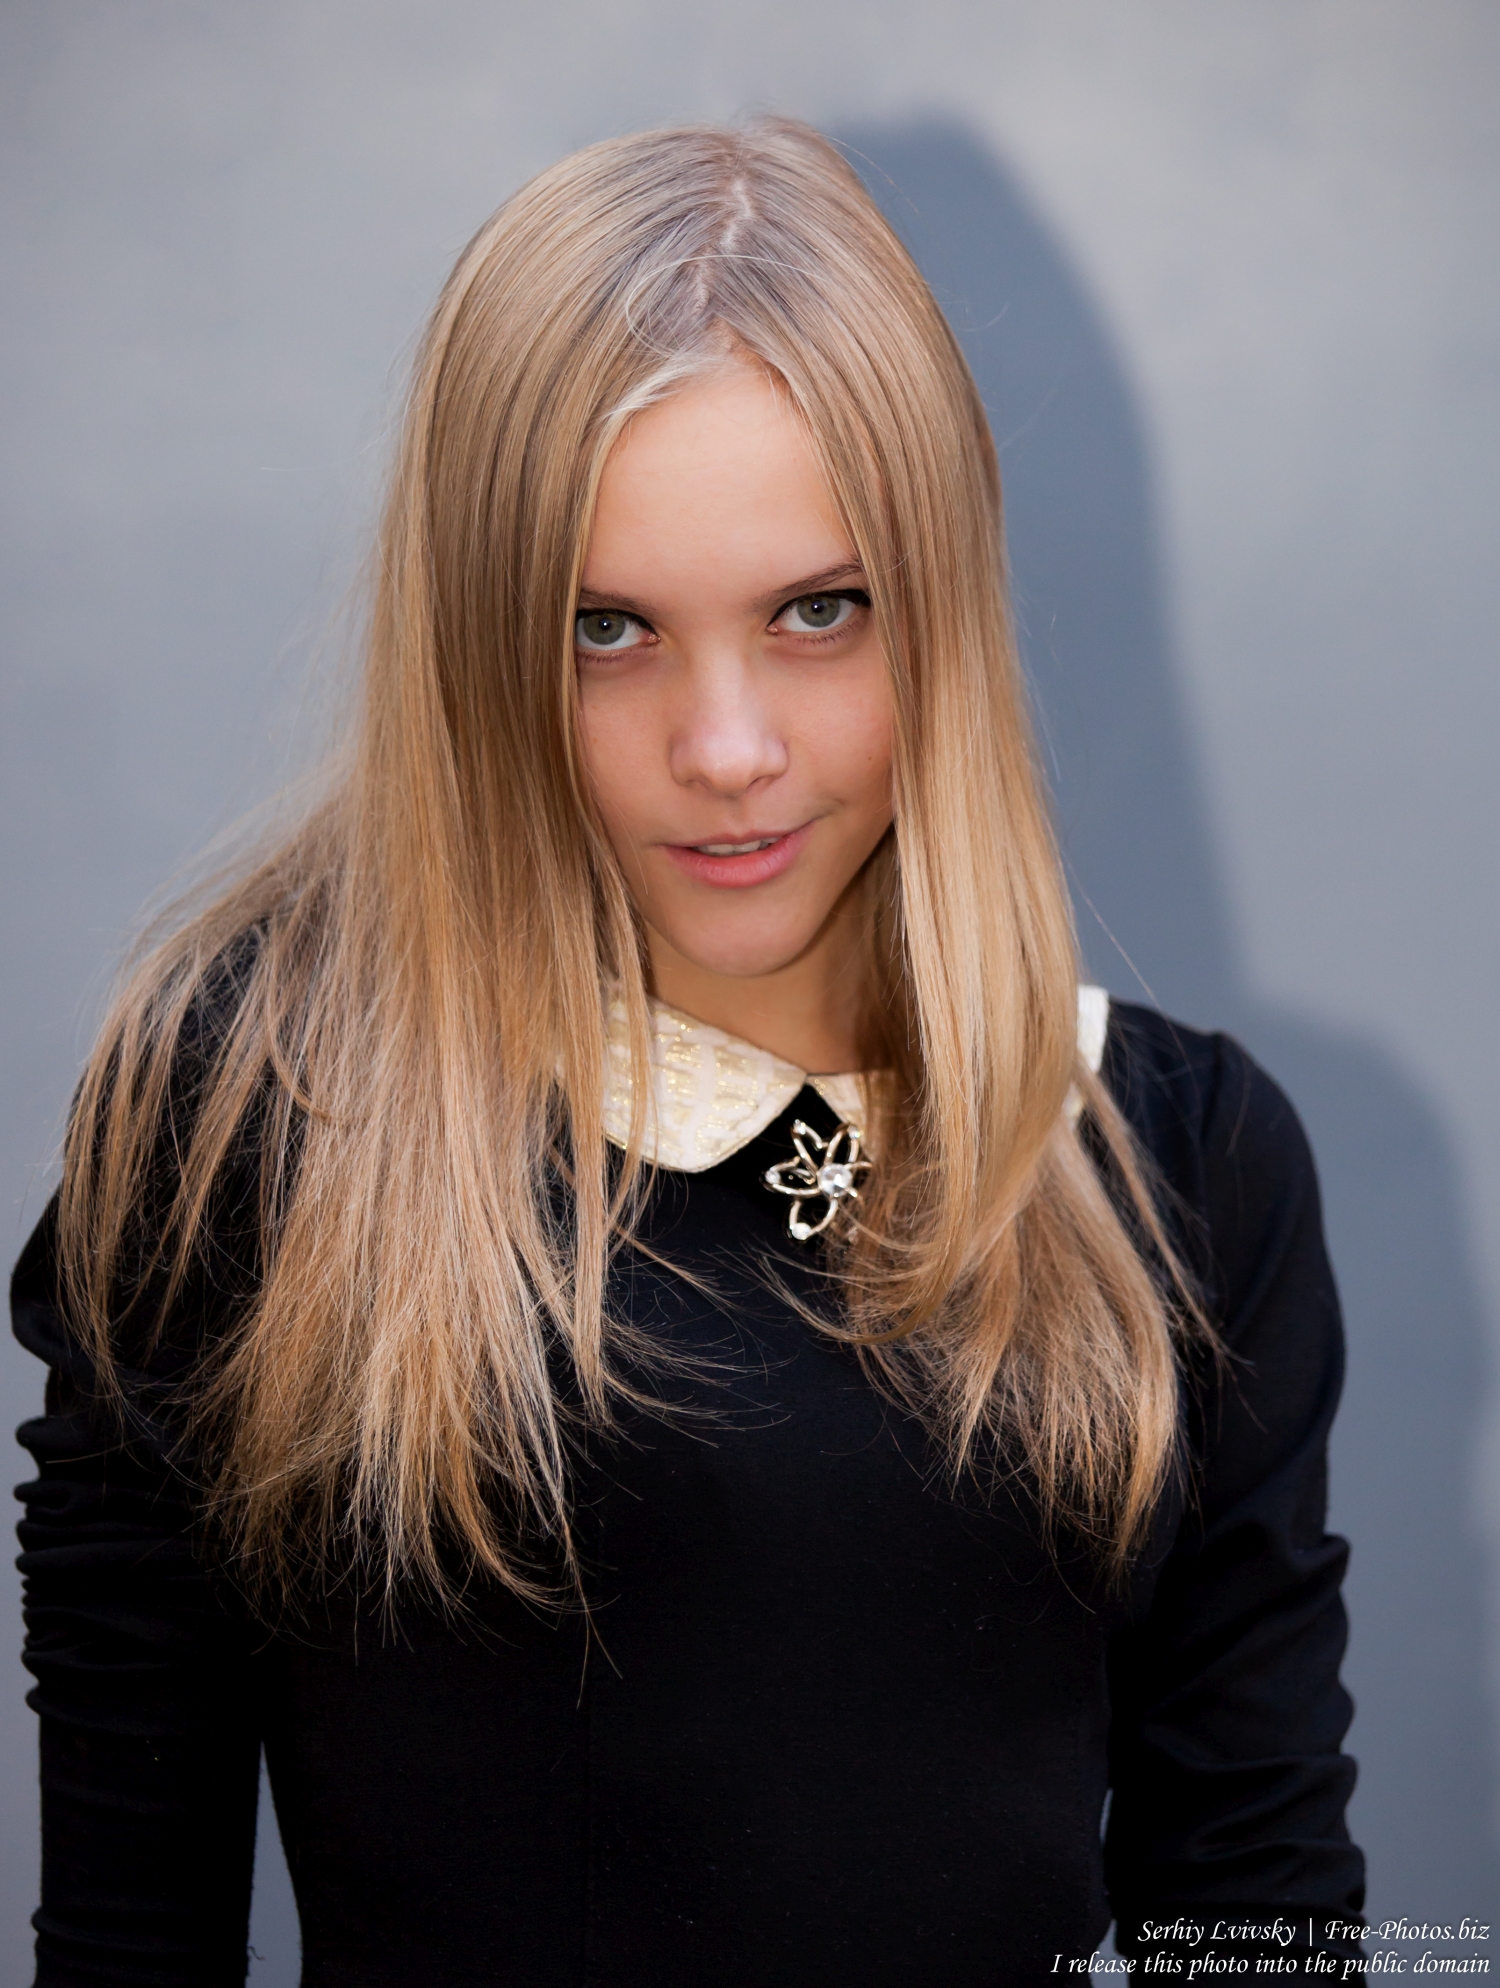 A 15-year-old blond girl photographed by Serhiy Lvivsky